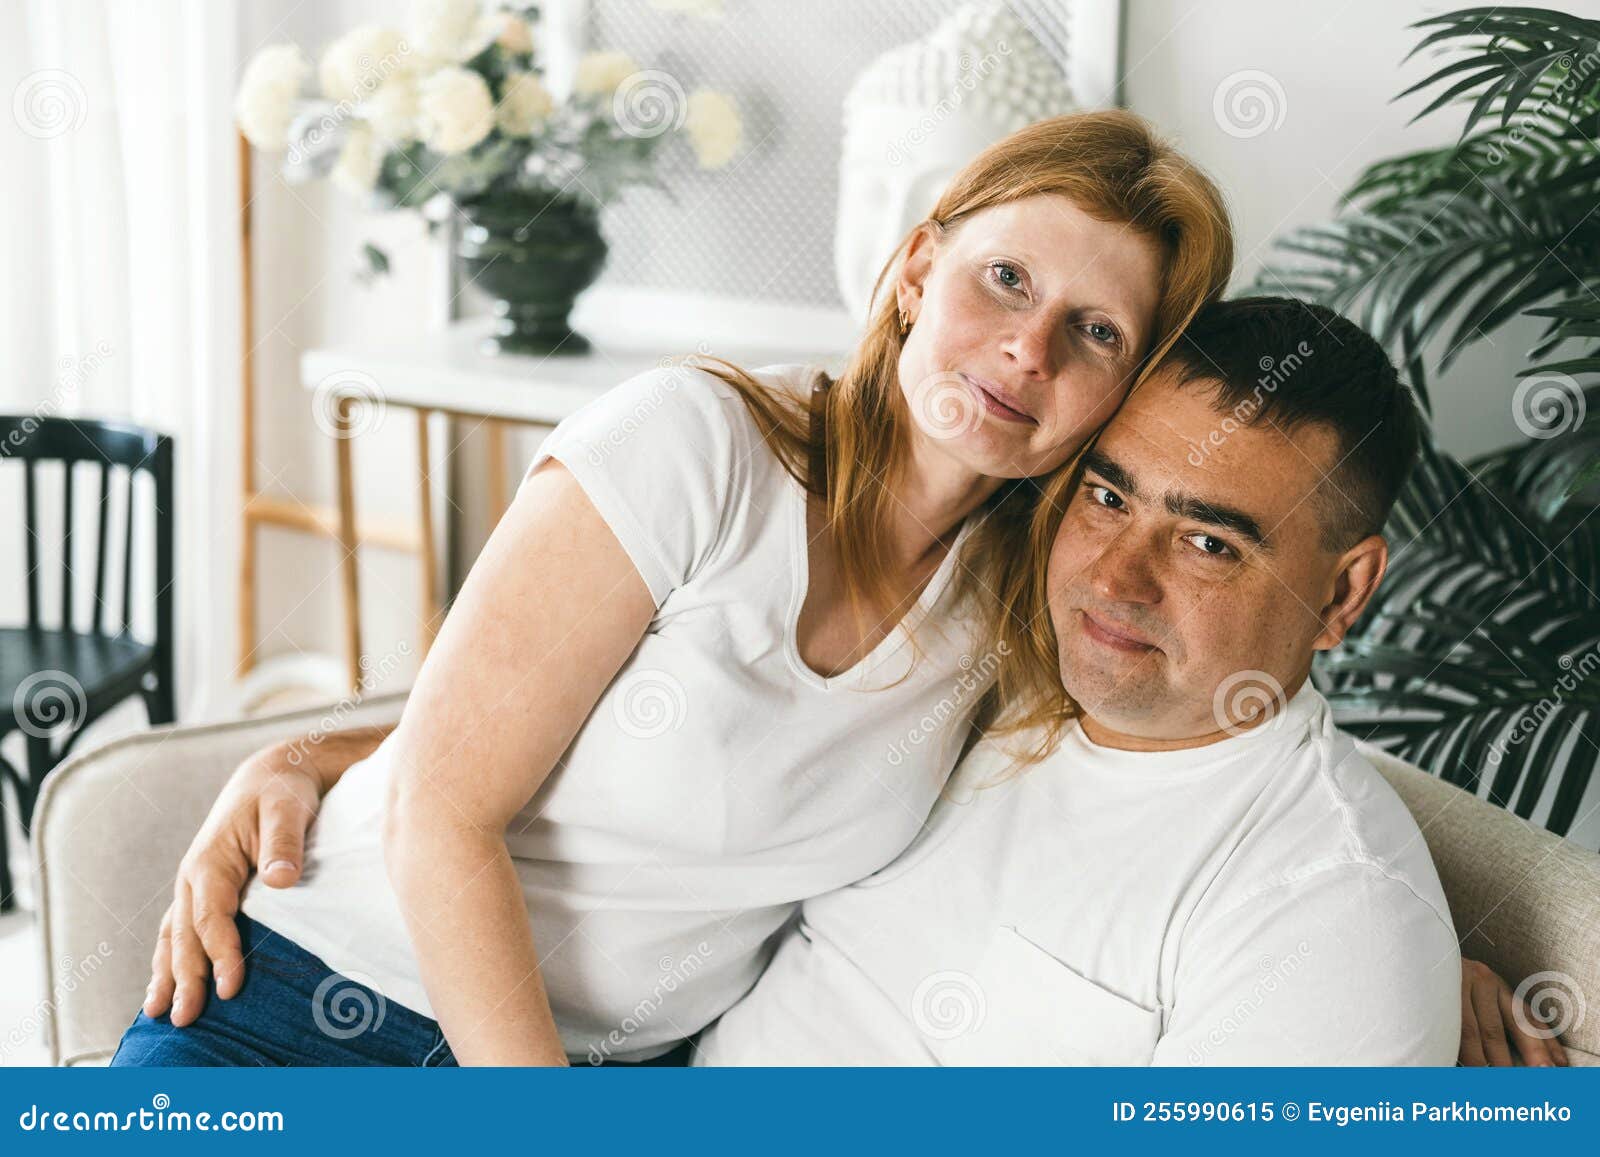 Middle Aged Married Couple Hugging On The Couch Stock Image Image Of Apartment Love 255990615